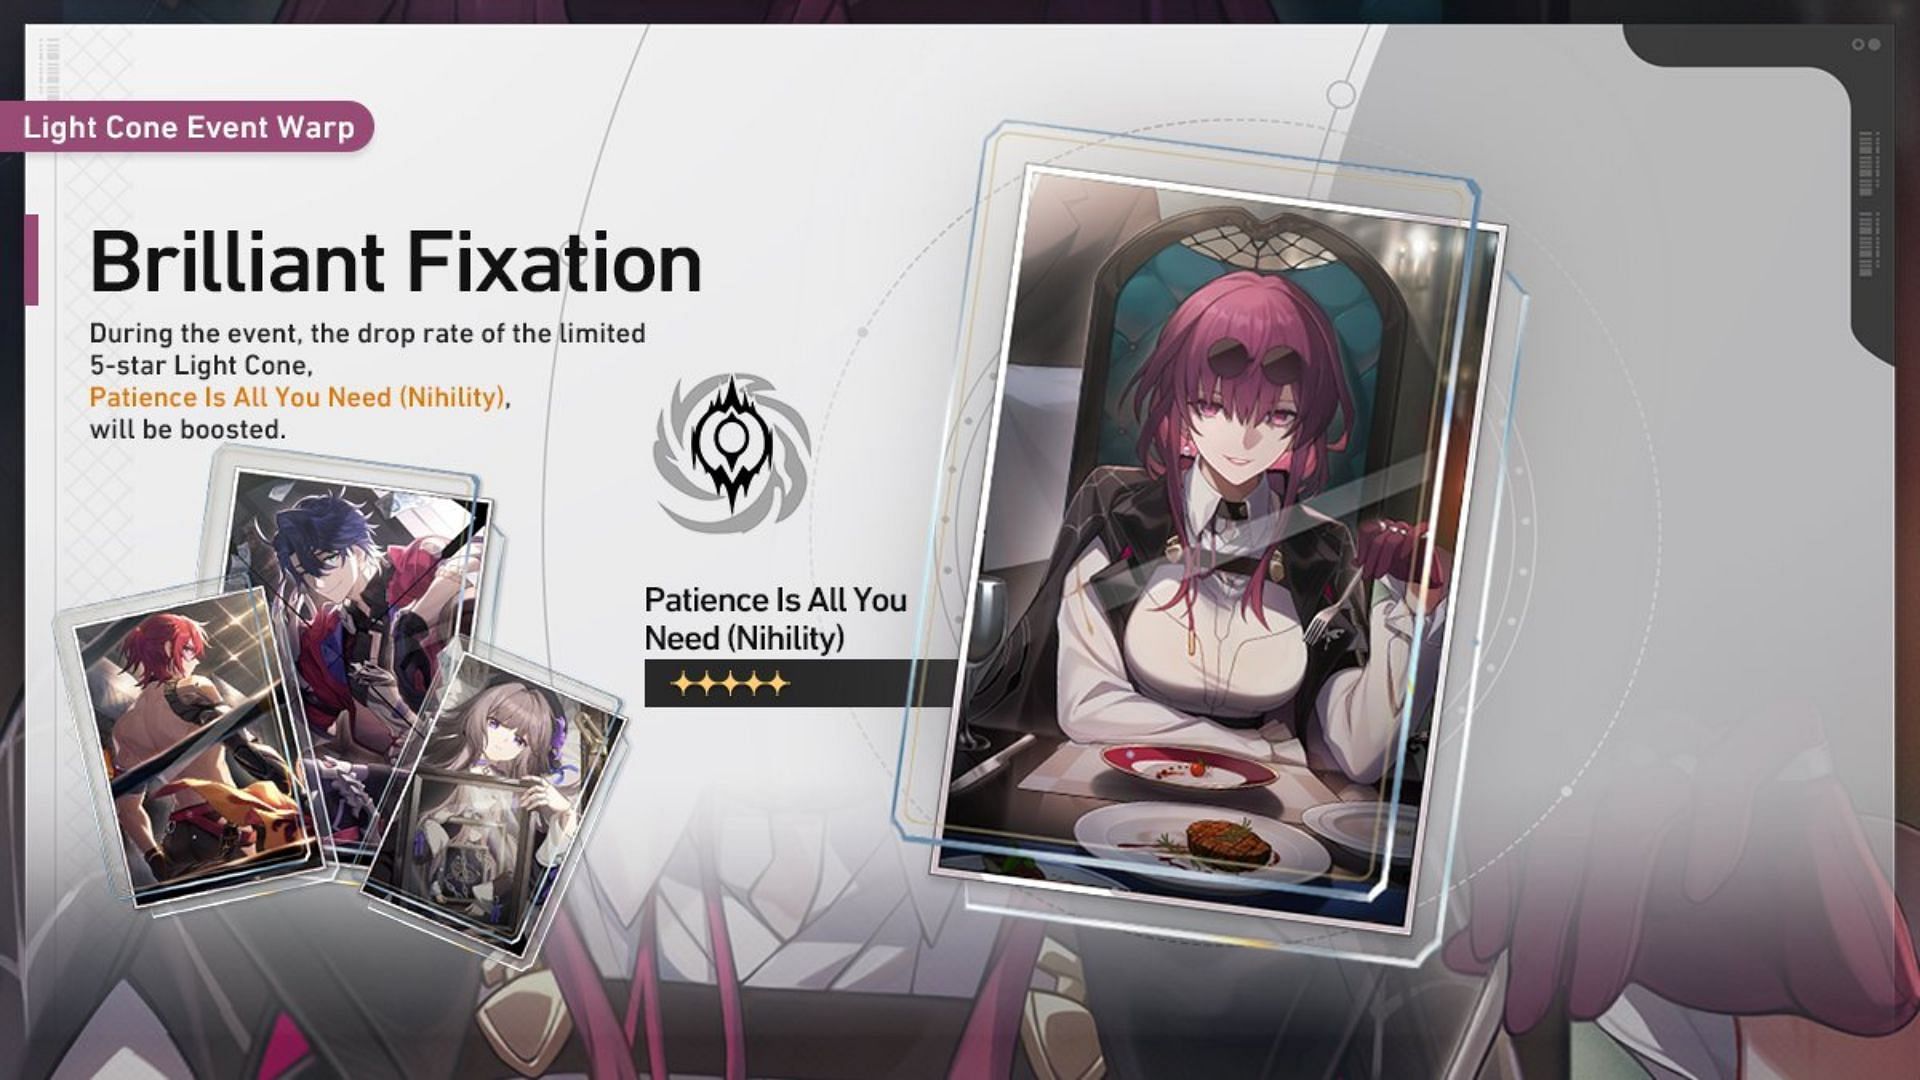 Patience is All You Need will be available at the Brilliant Fixation event (Image via HoYoverse)